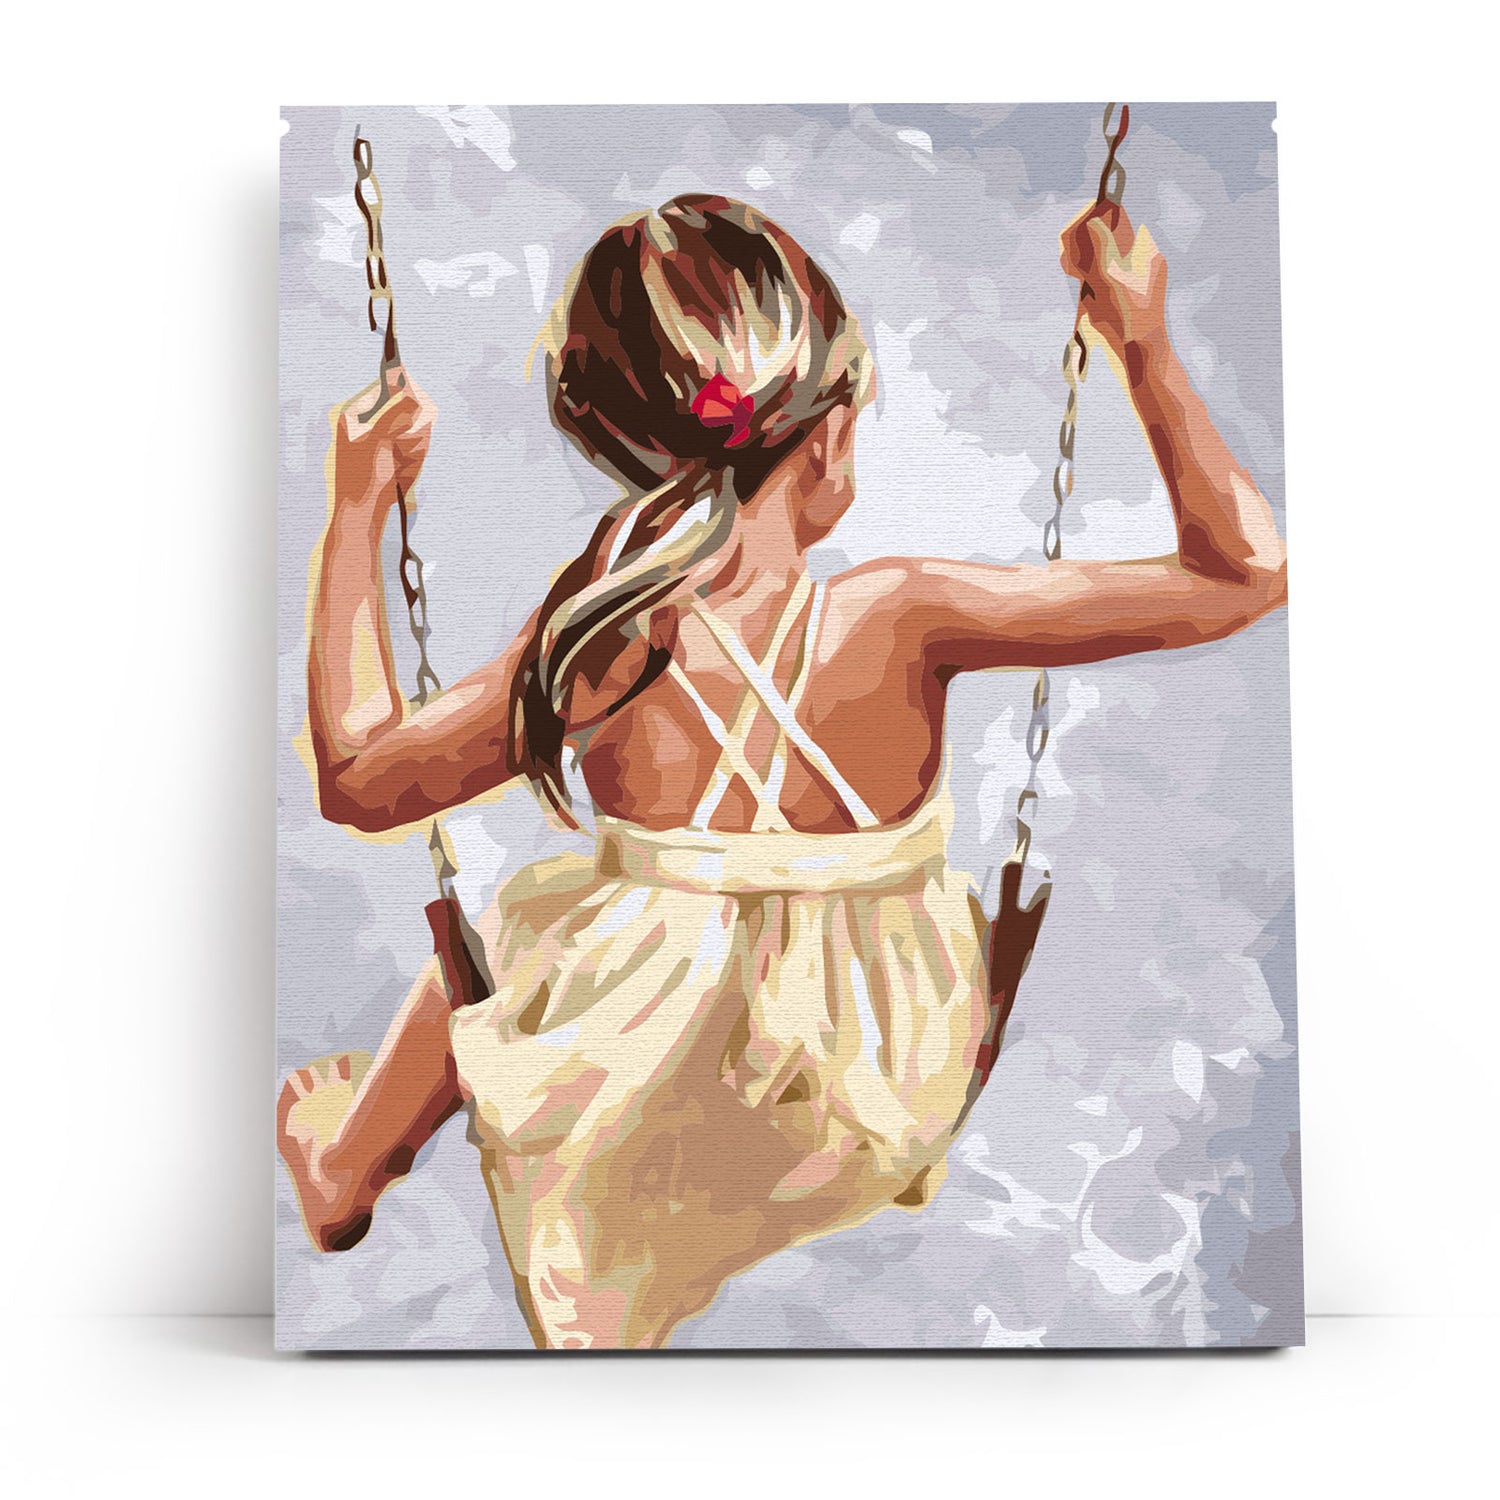 Painting by numbers - MG2106e - Happiness on the Swing Image 1